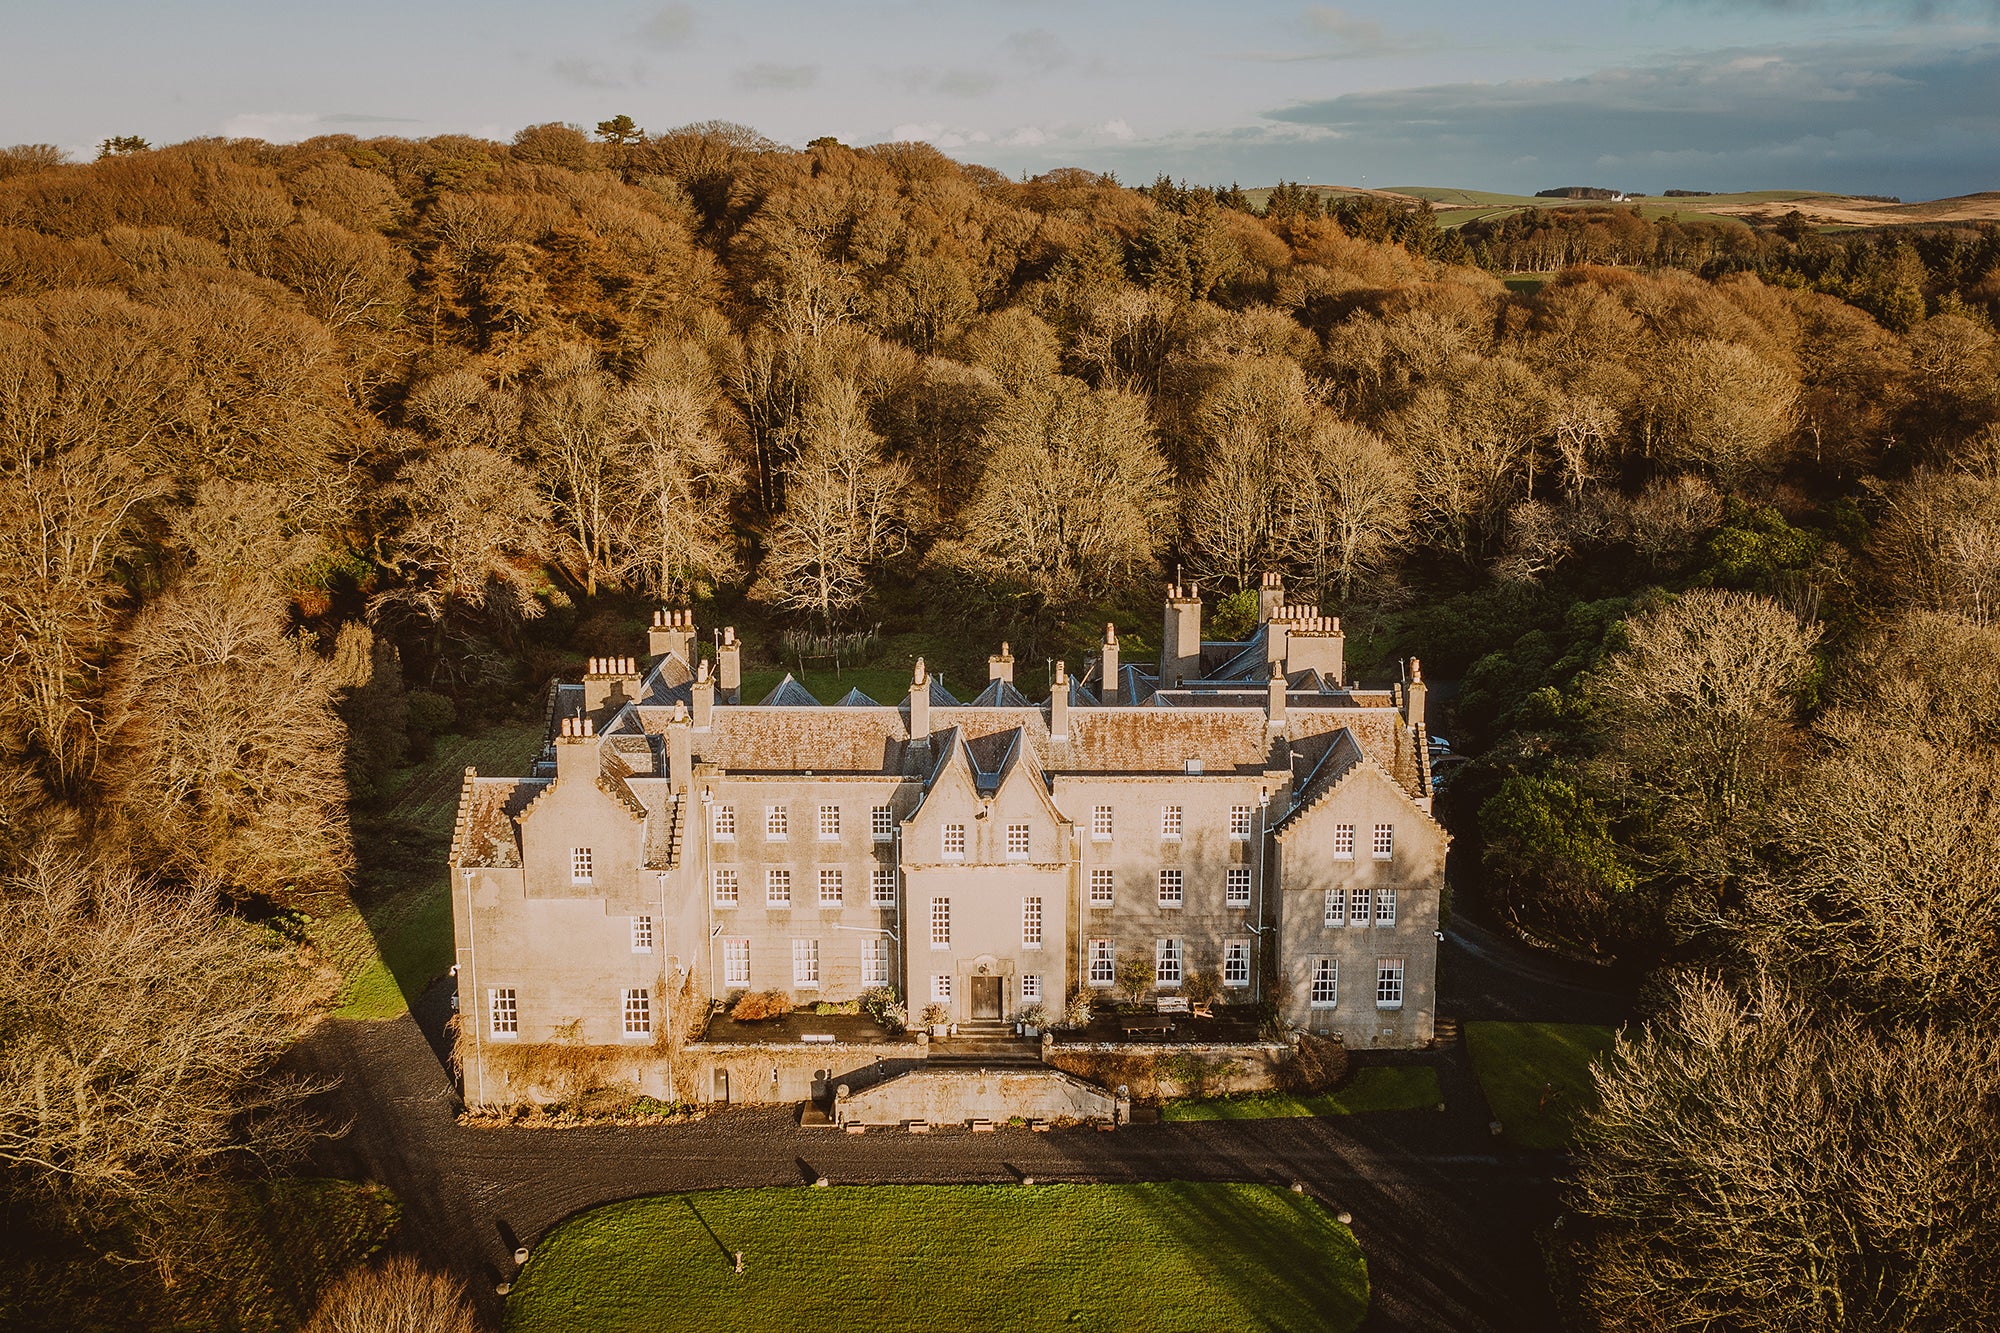 This Edwardian castle features elegant rooms fit for a queen